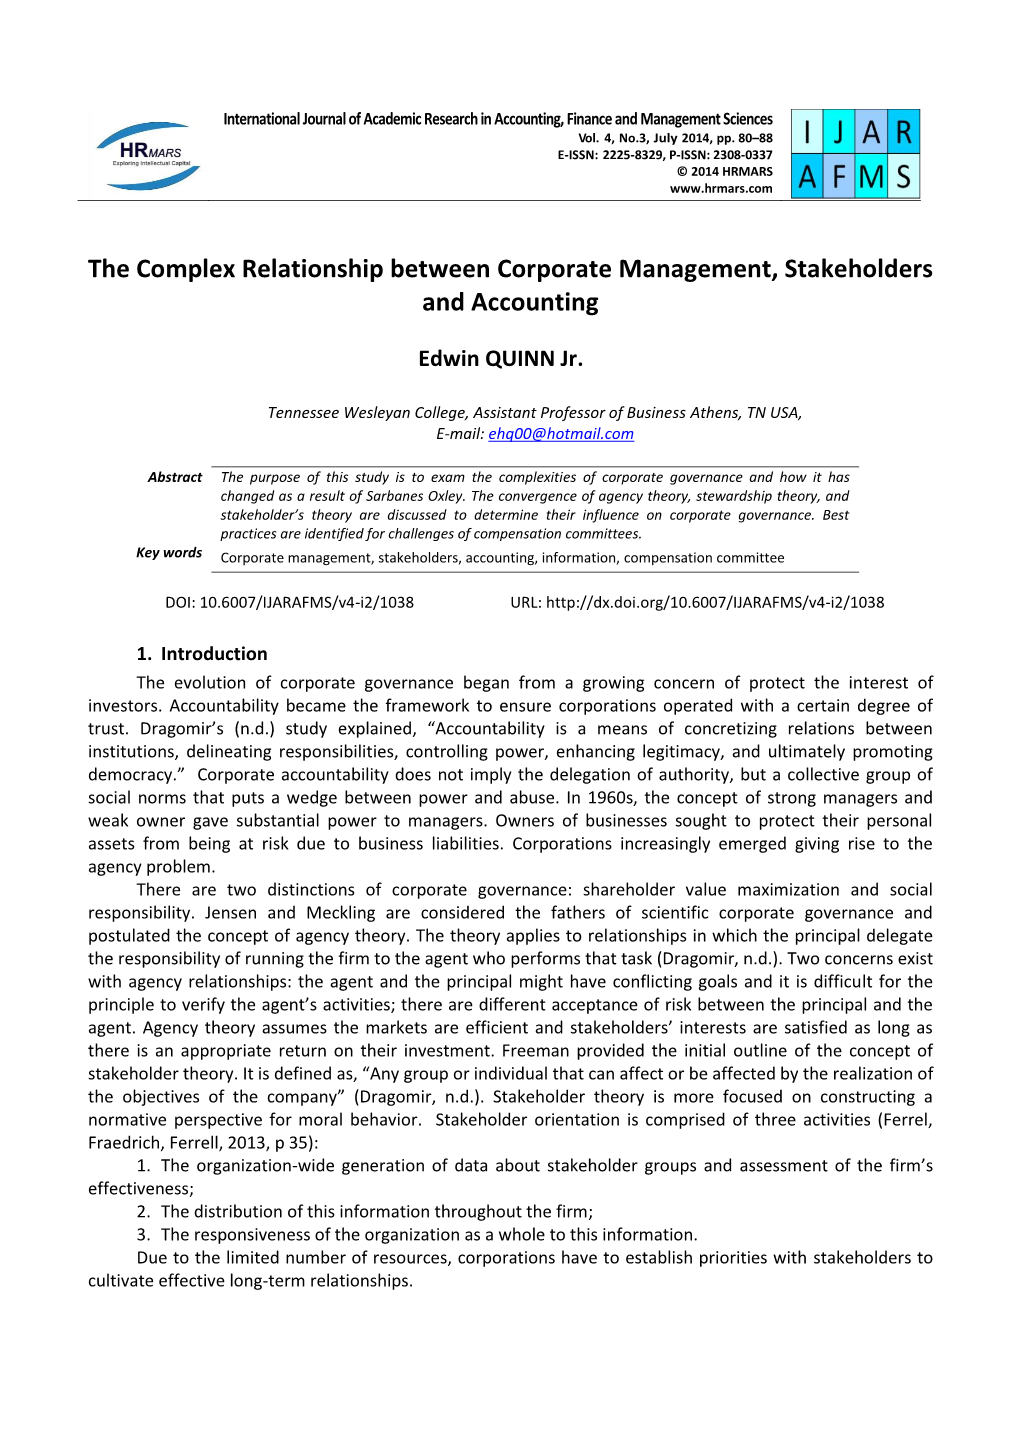 The Complex Relationship Between Corporate Management, Stakeholders and Accounting